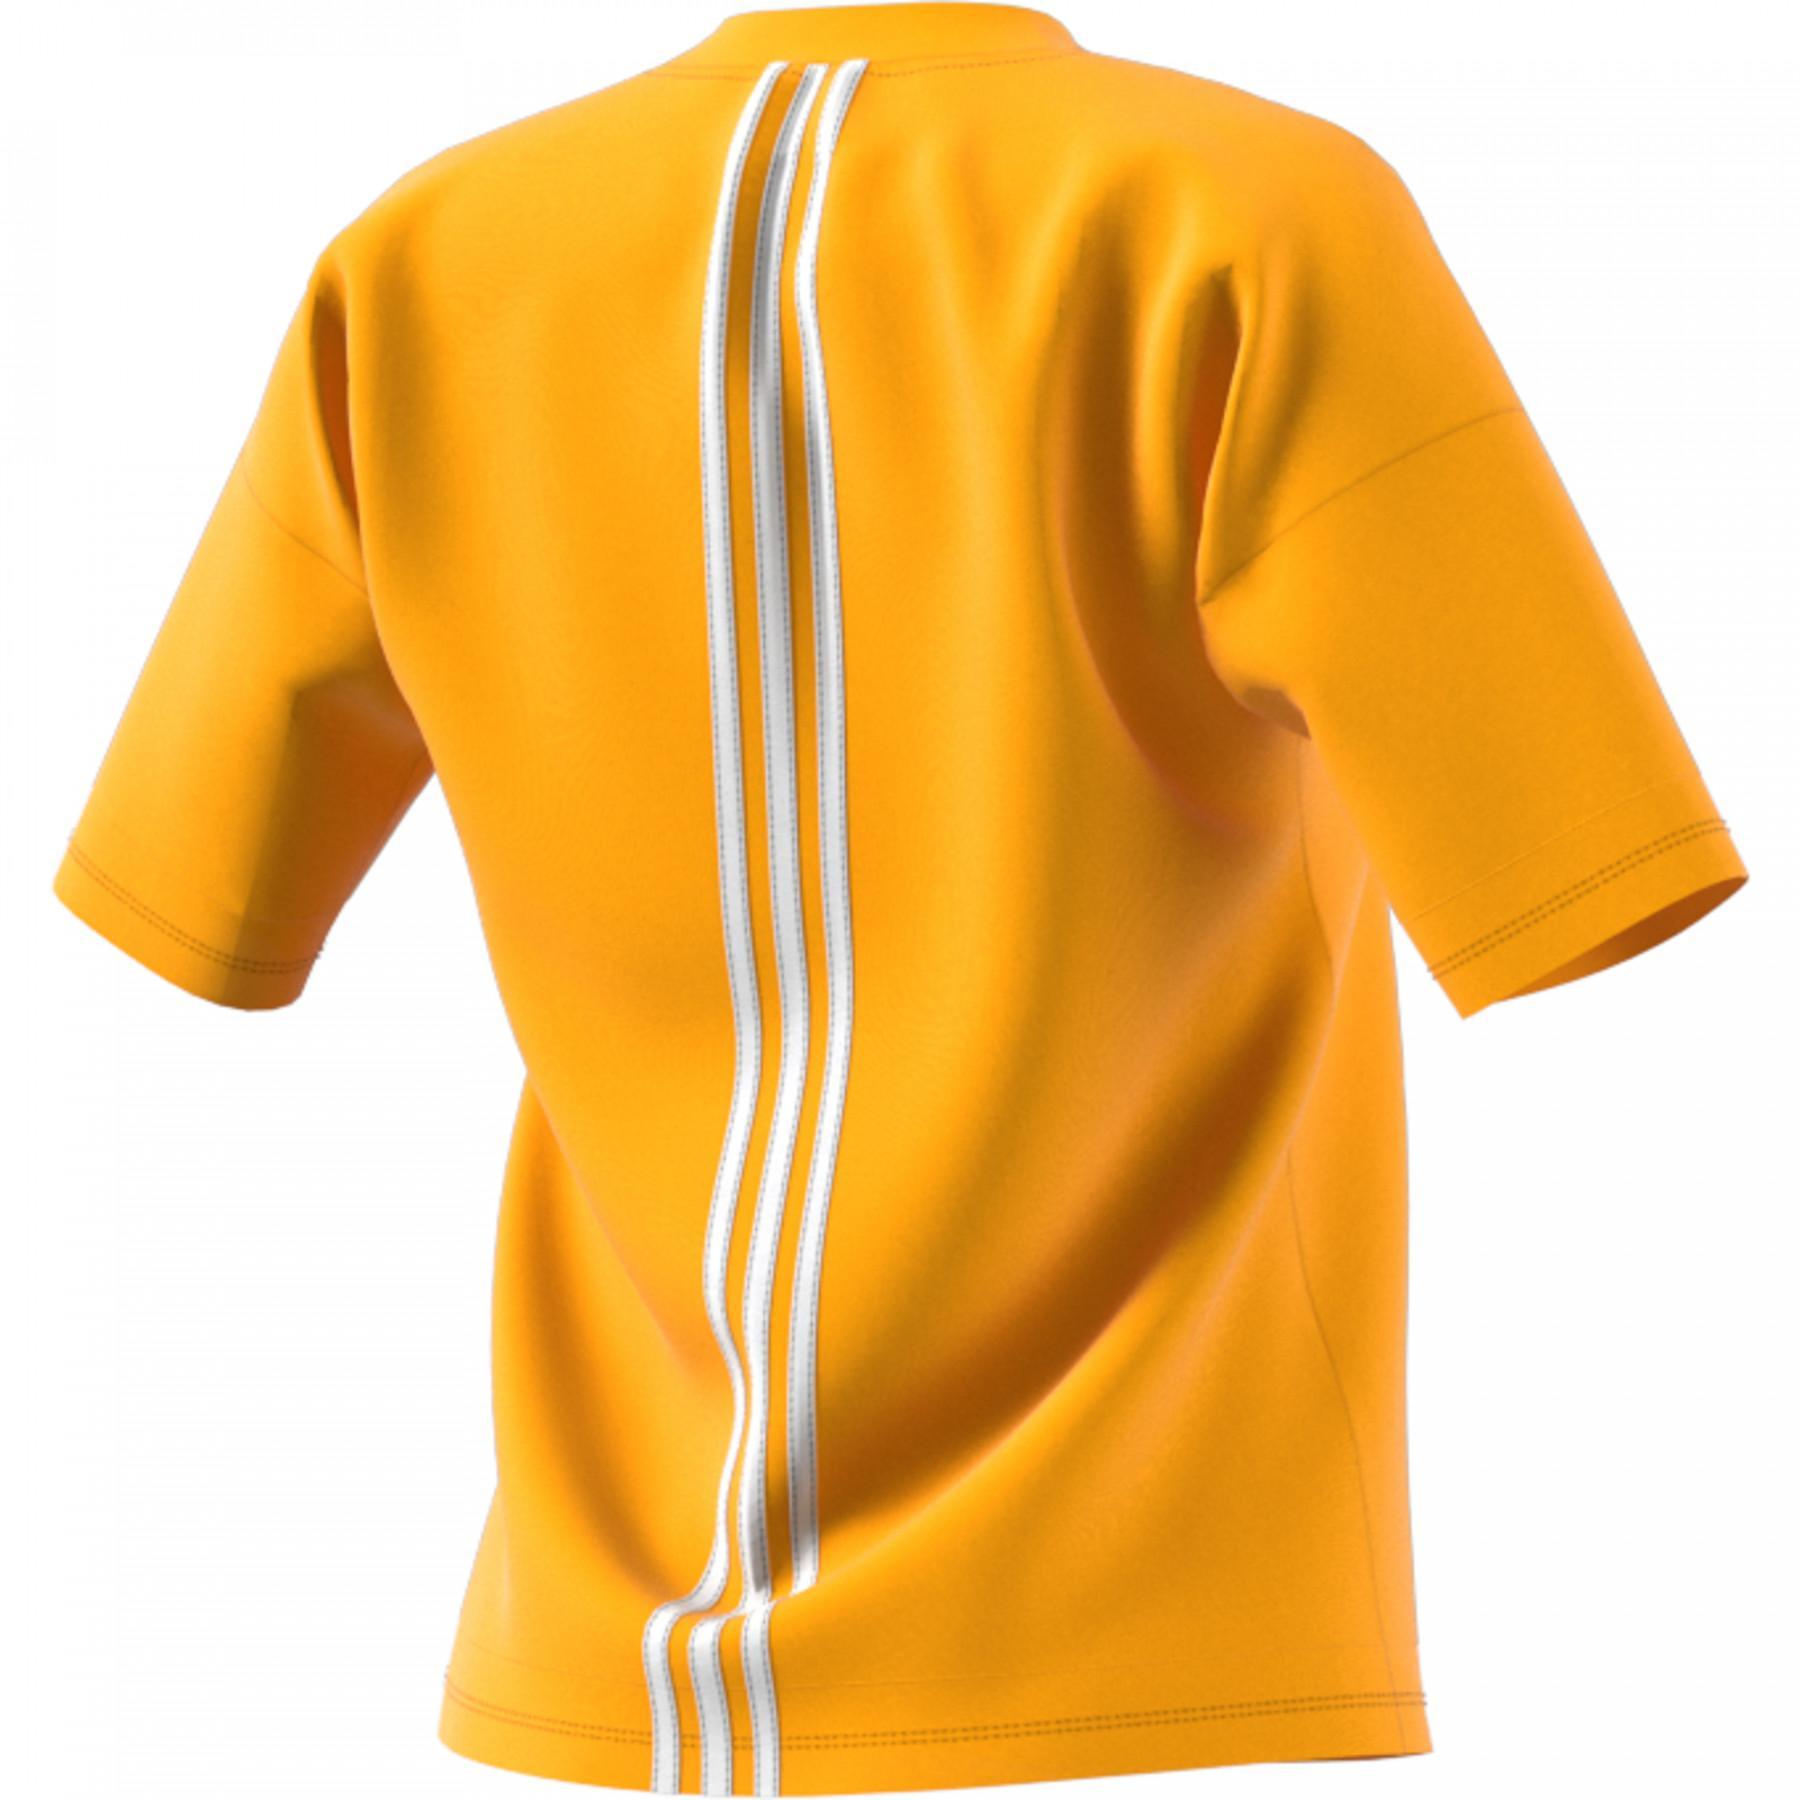 Women's T-shirt adidas Must Haves 3-Stripes